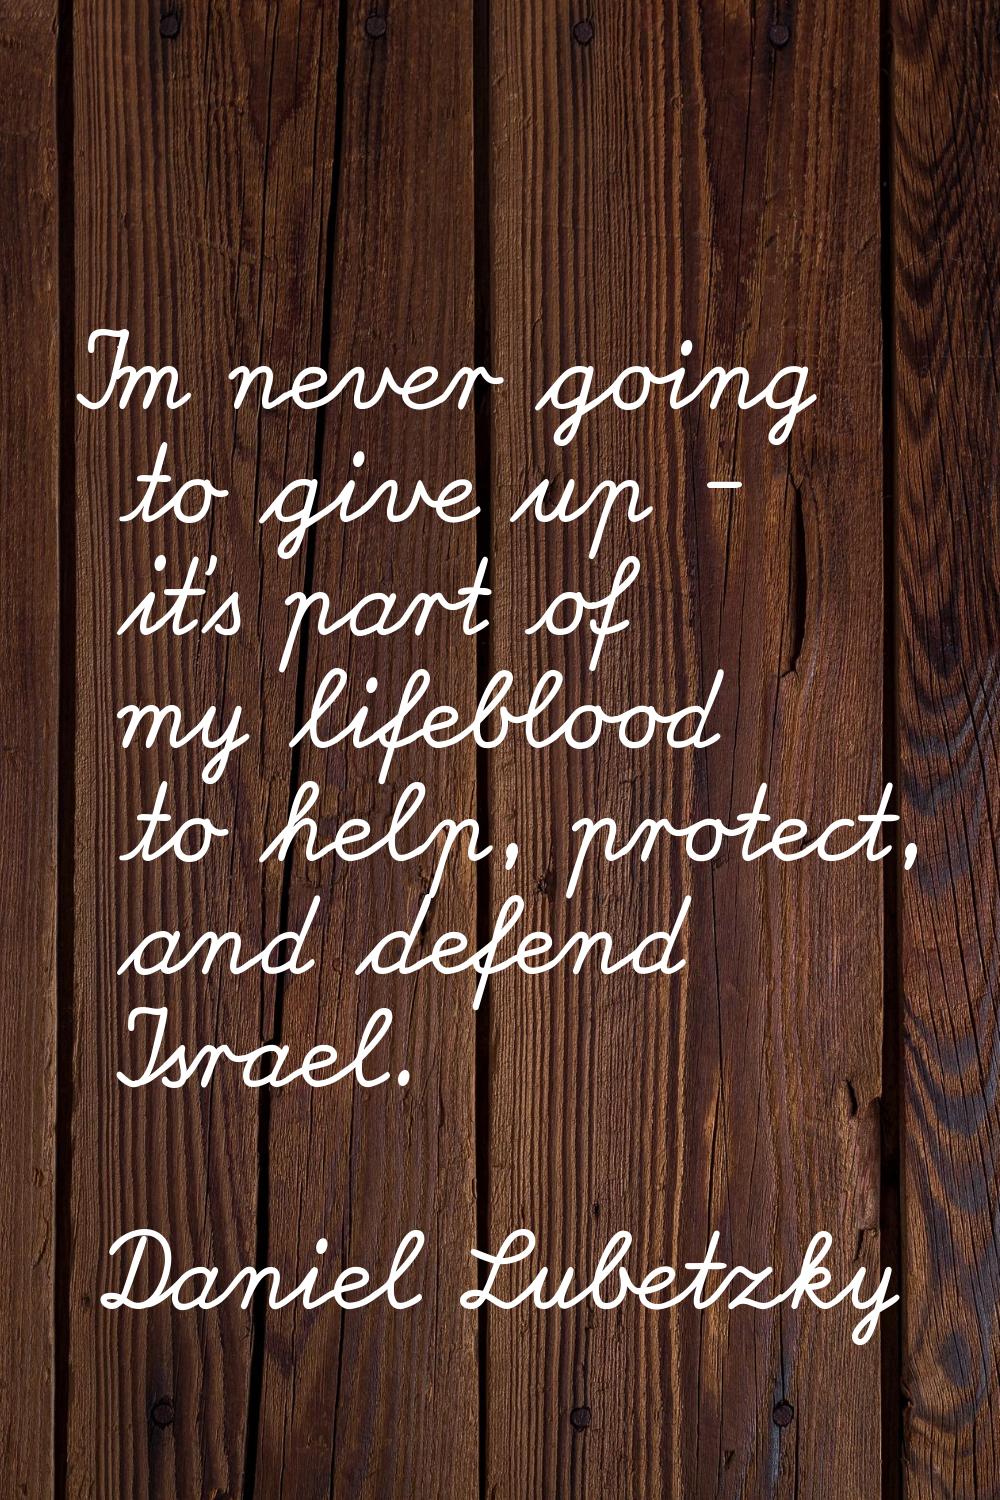 I'm never going to give up - it's part of my lifeblood to help, protect, and defend Israel.